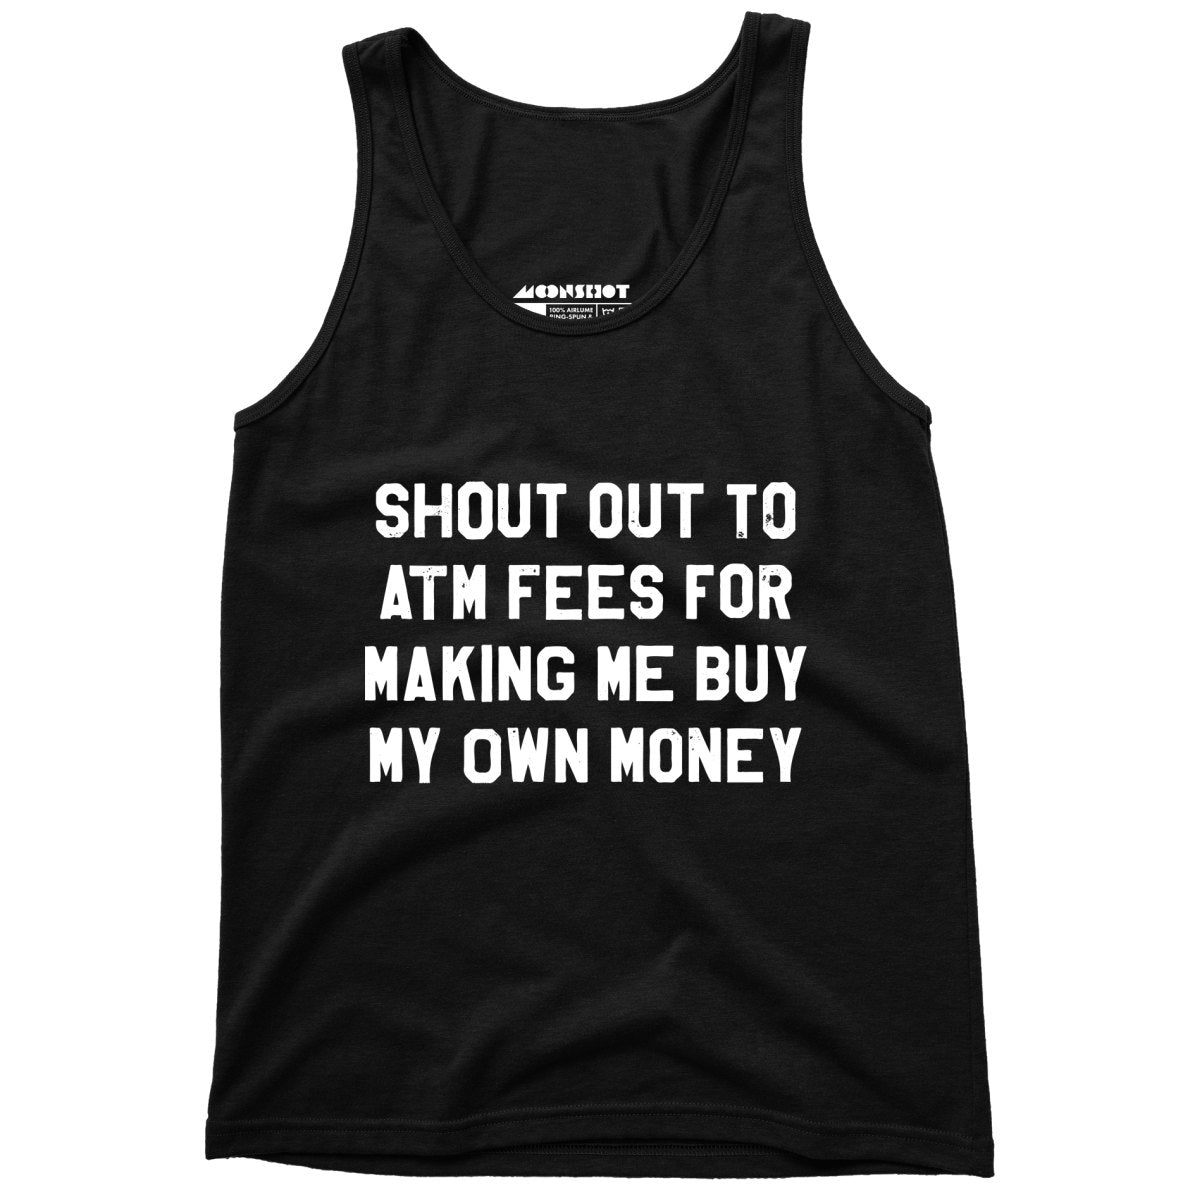 Shout Out to ATM Fees for Making Me Buy My Own Money - Unisex Tank Top